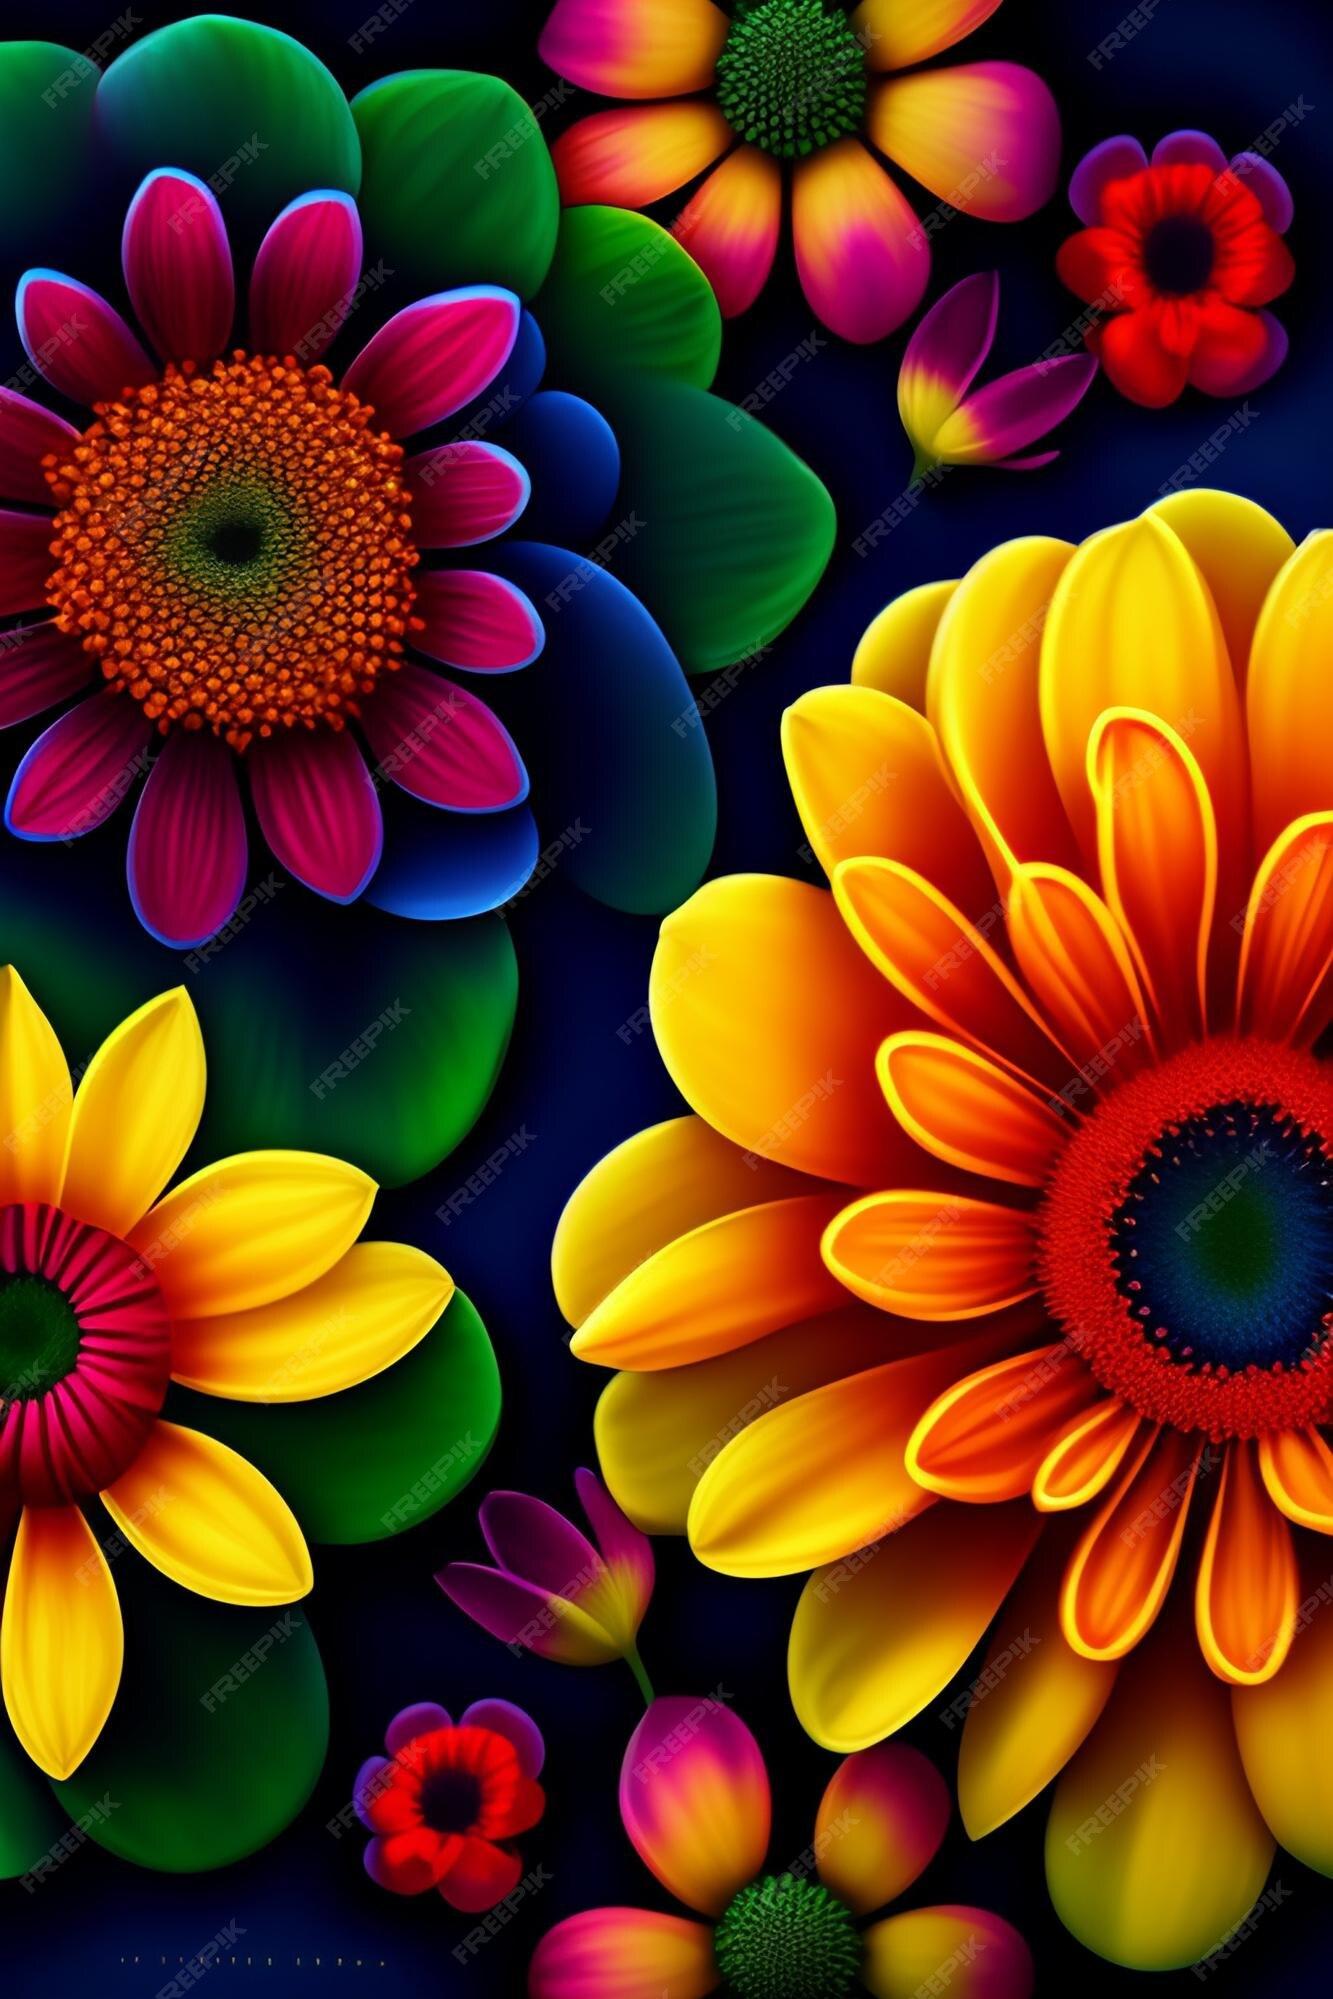 Premium Photo A colorful floral pattern with a black background